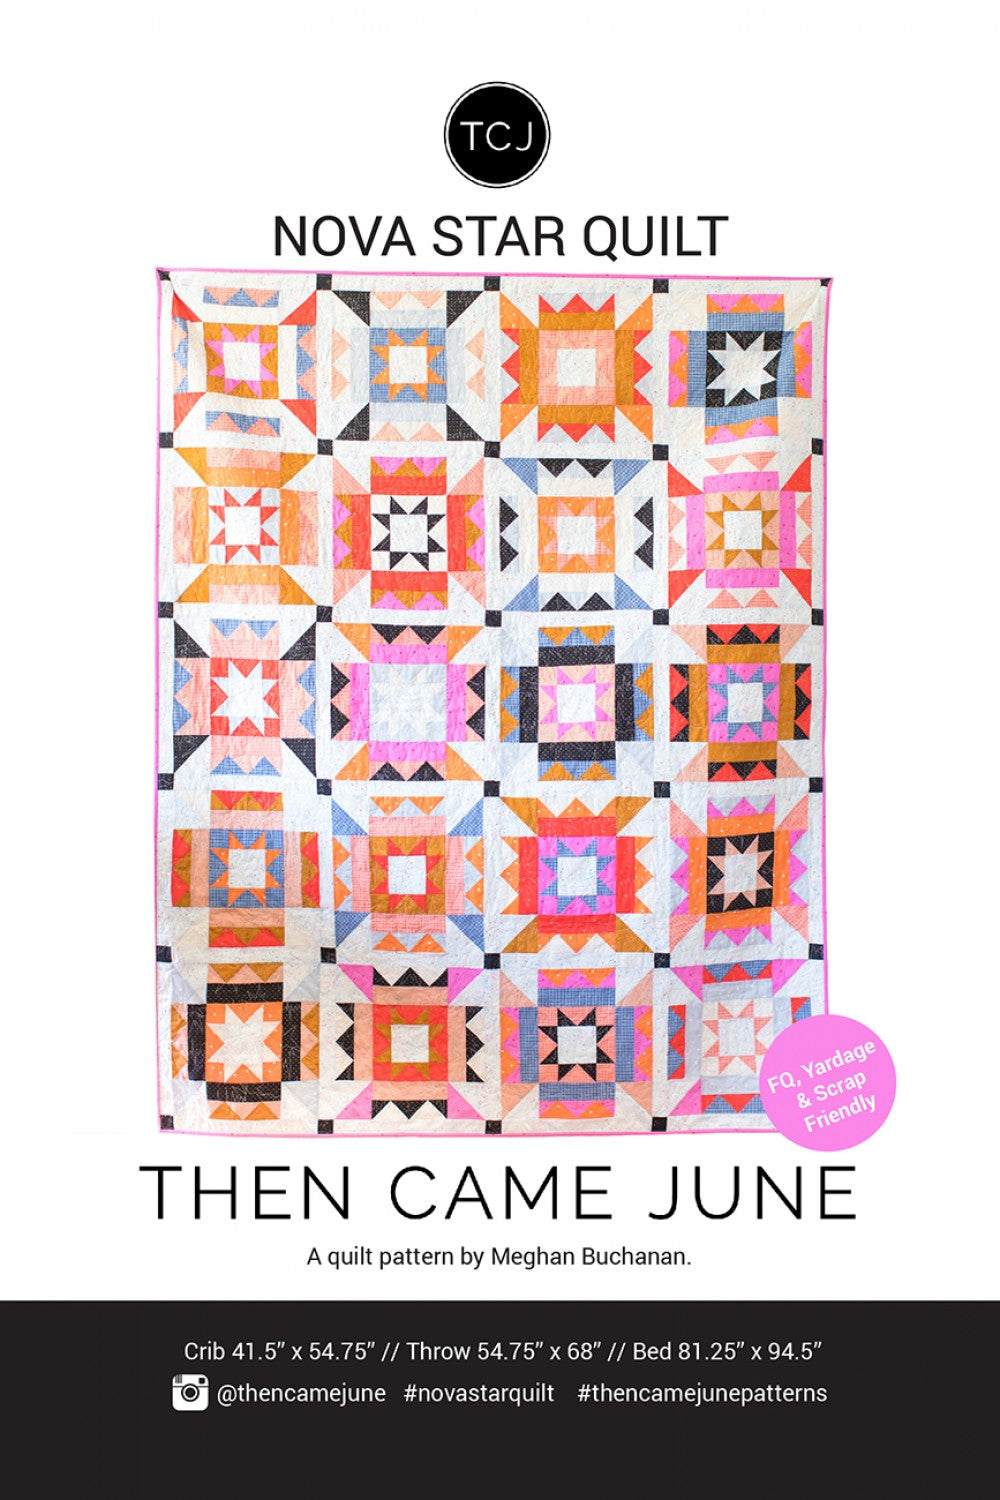 Nova Star Quilt Kit includes Palette picks original fabrics throw size from Then Came June By Meghan Buchanan or just the Palette Picks fabrics